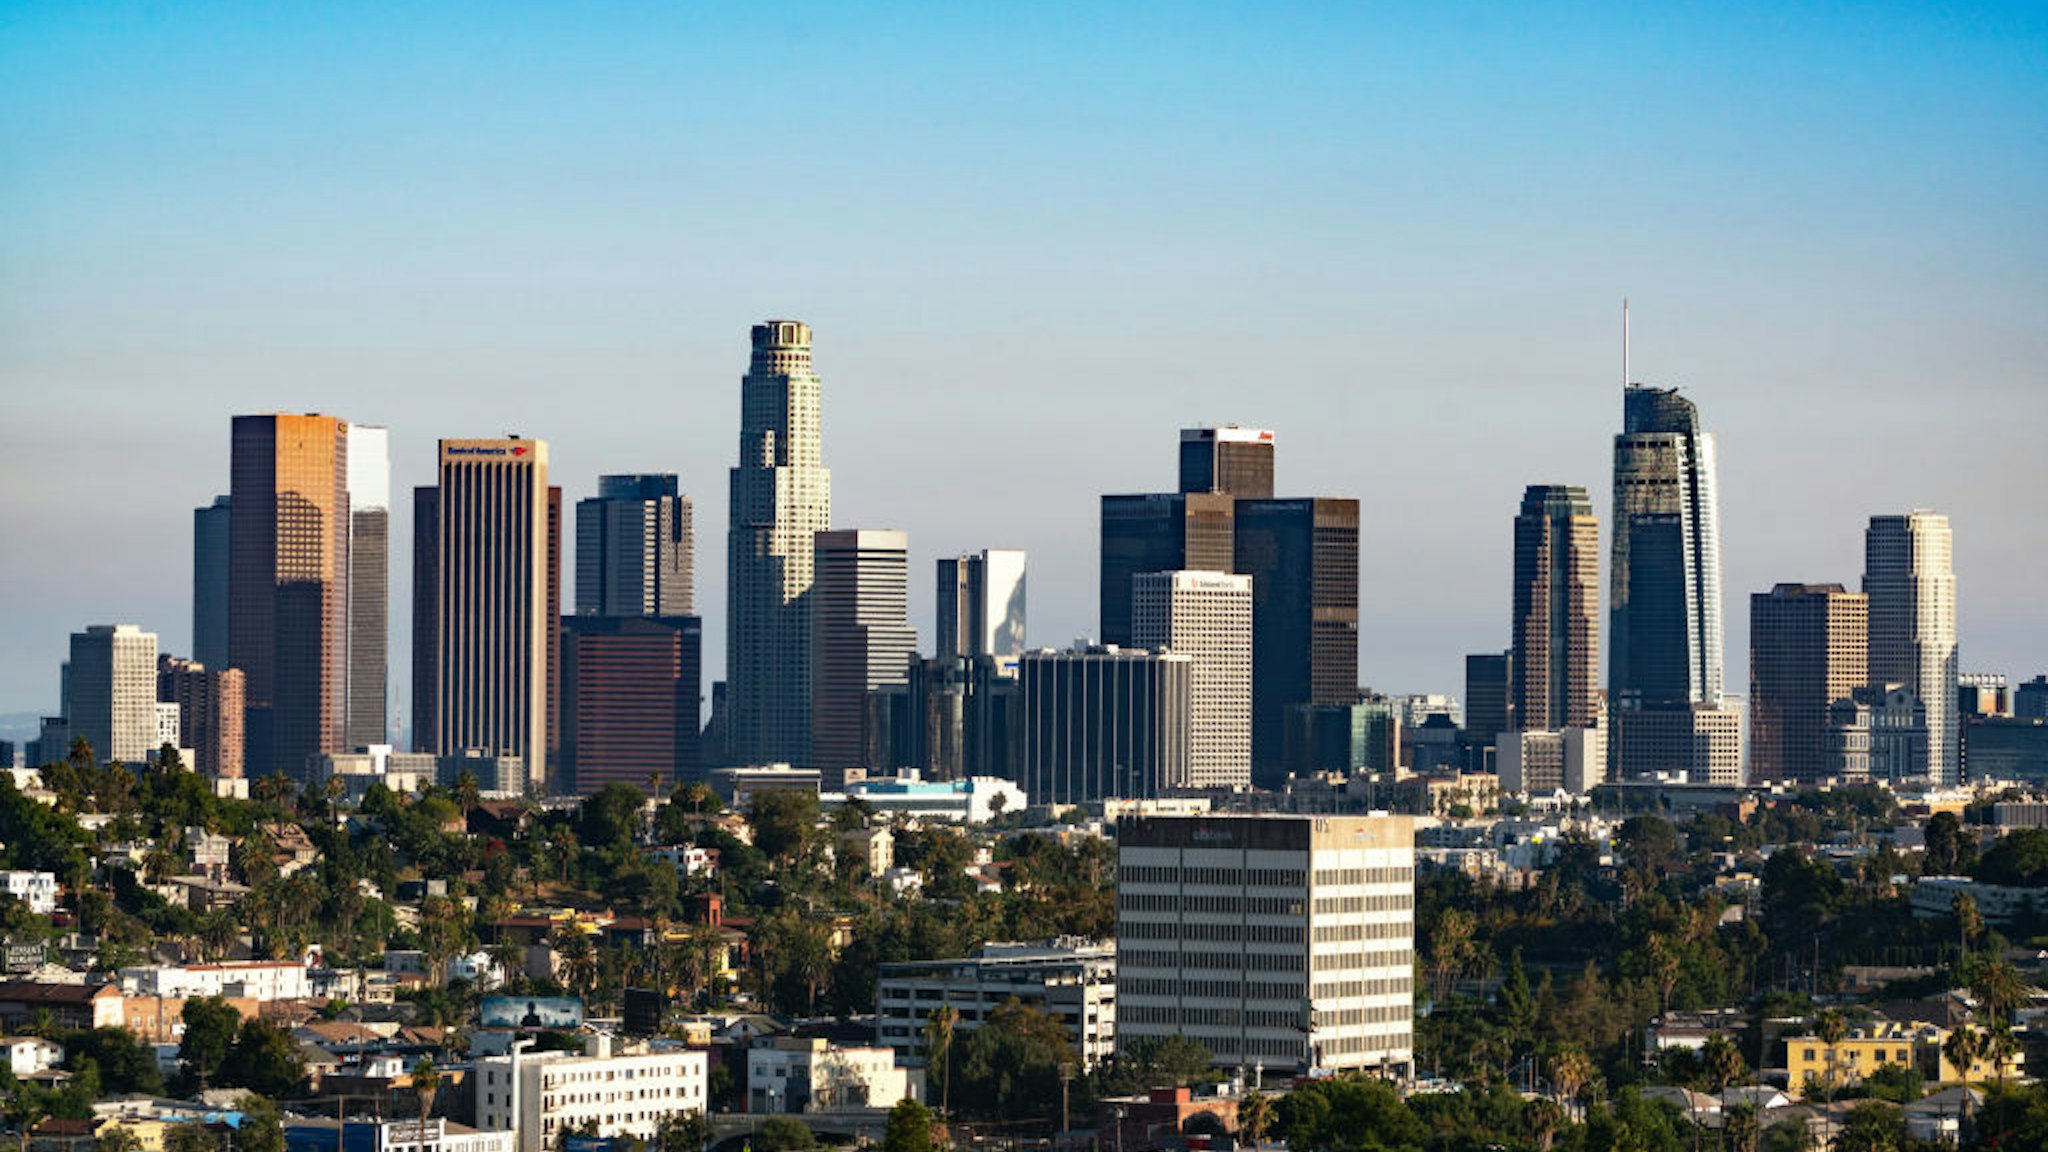 A general view of the Downtown Los Angeles skyline on July 24, 2020 in Los Angeles, California. (Photo by AaronP/Bauer-Griffin/GC Images)